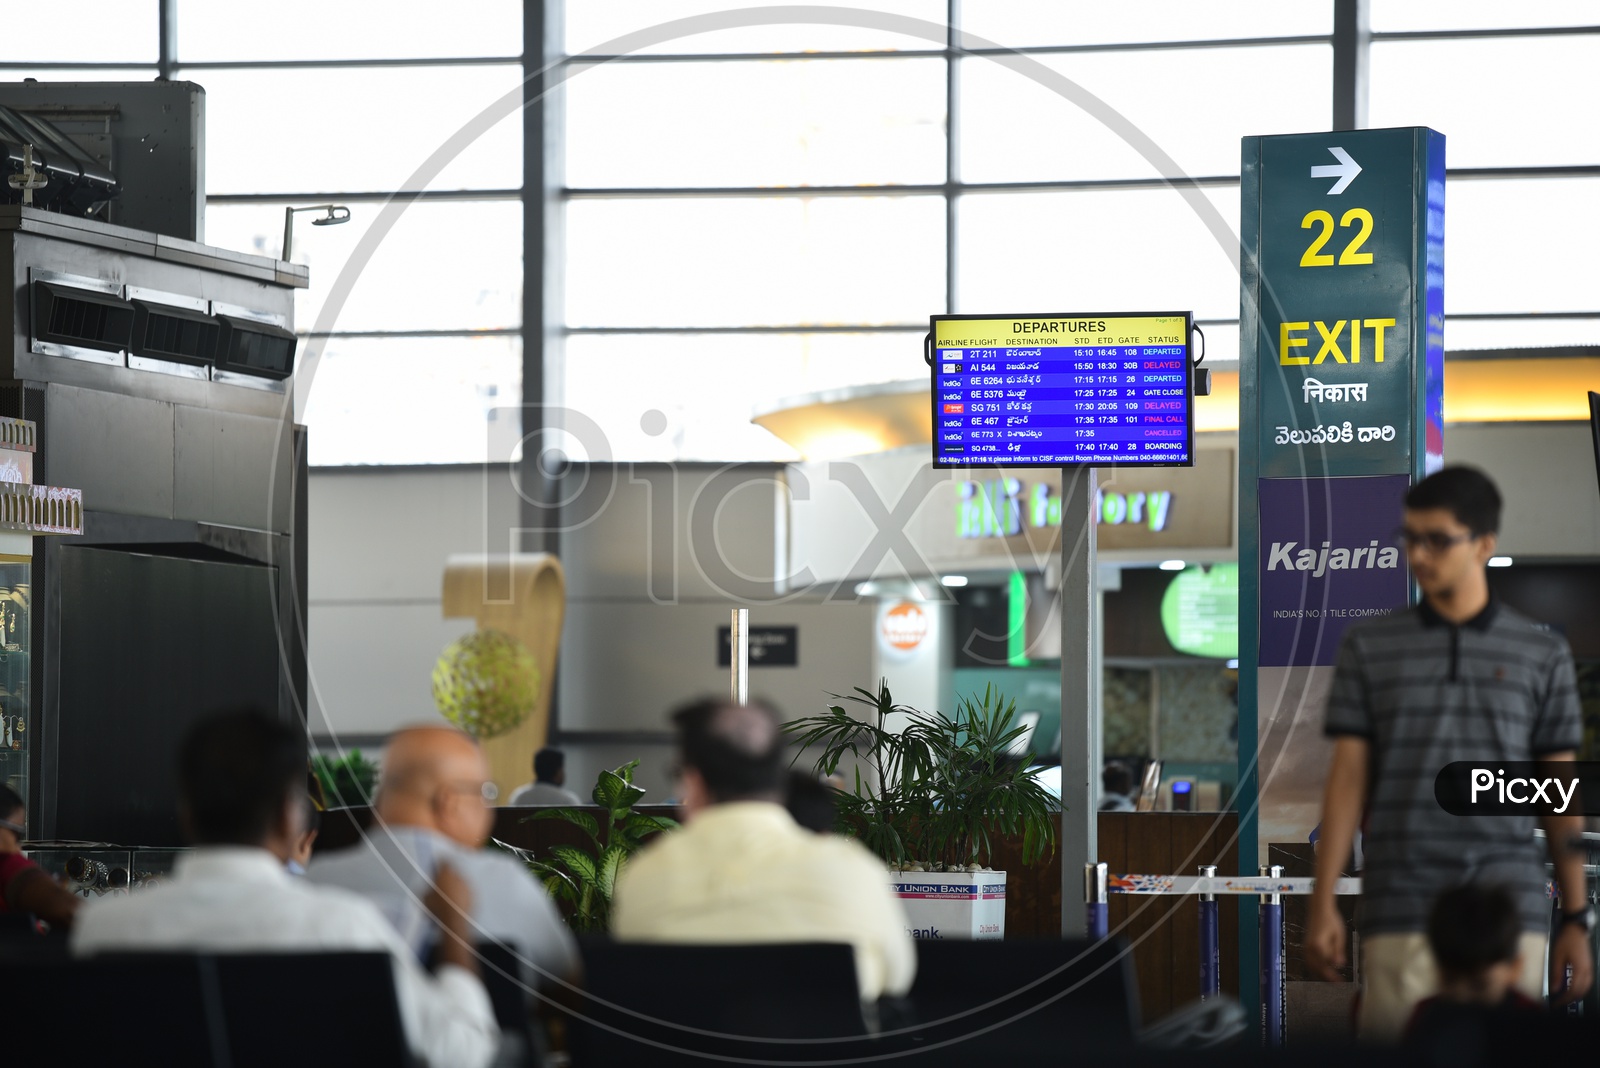 Airport scenes  With Passengers Waiting In  Waiting Lounge  And Departure Display  Screens